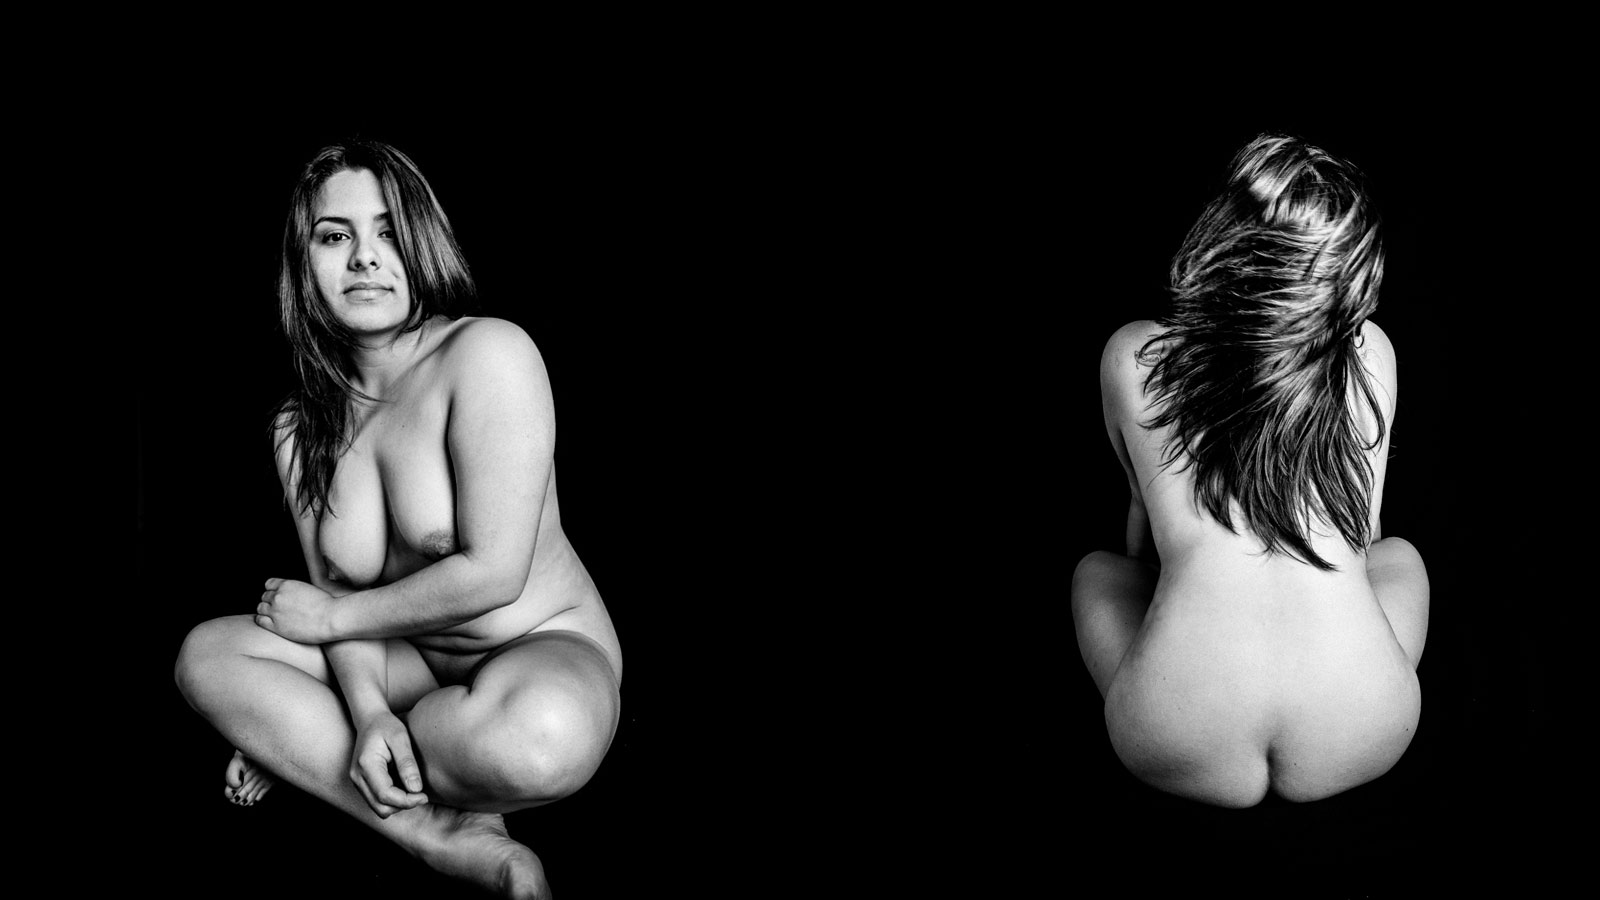 Nude in the dark © by matheu.es